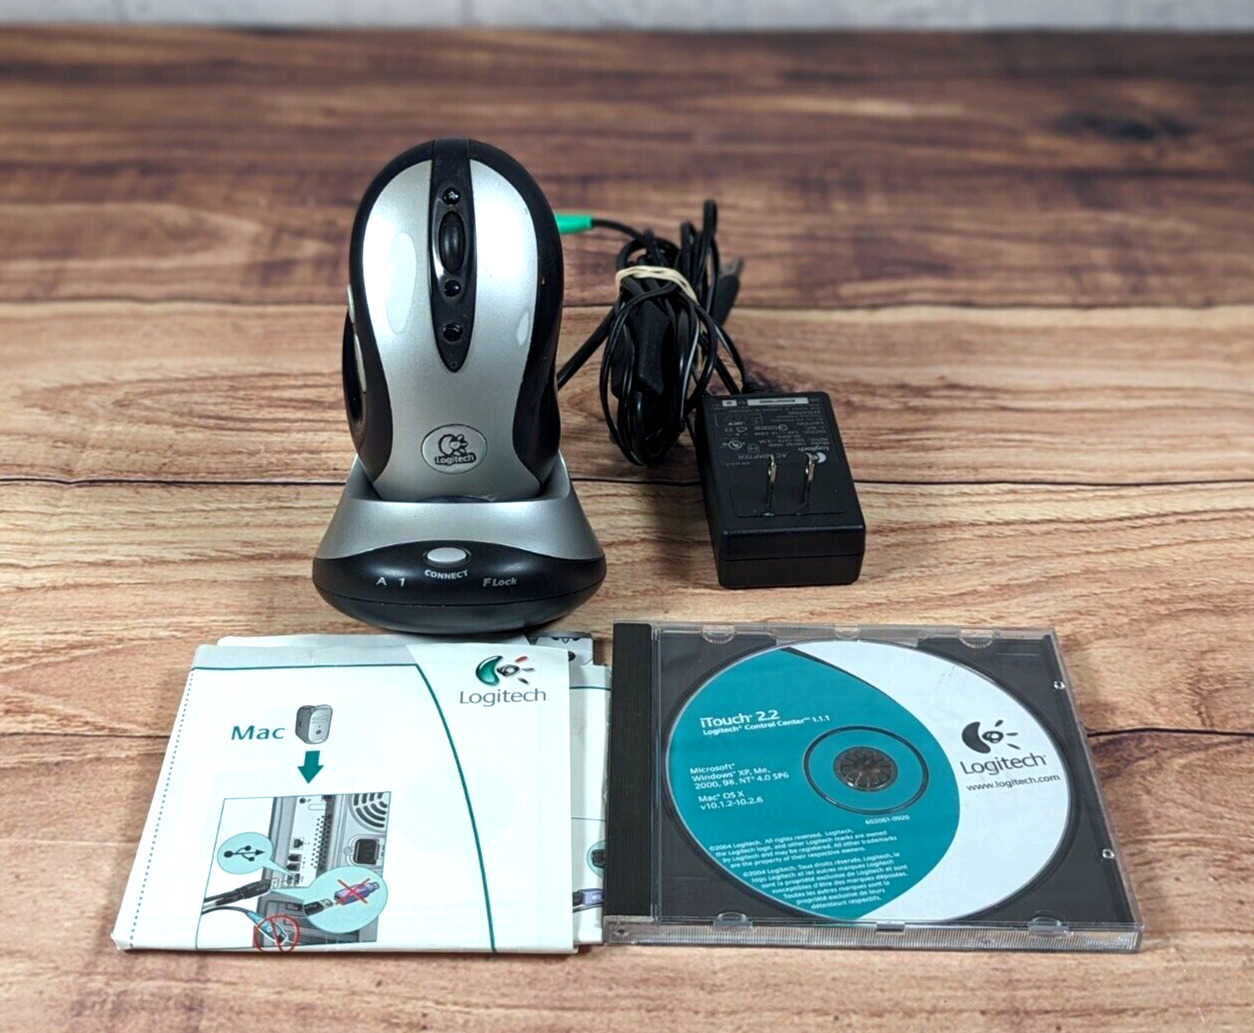 Vintage Logitech MX700 Cordless Optical Mouse with Docking Station Tested Works